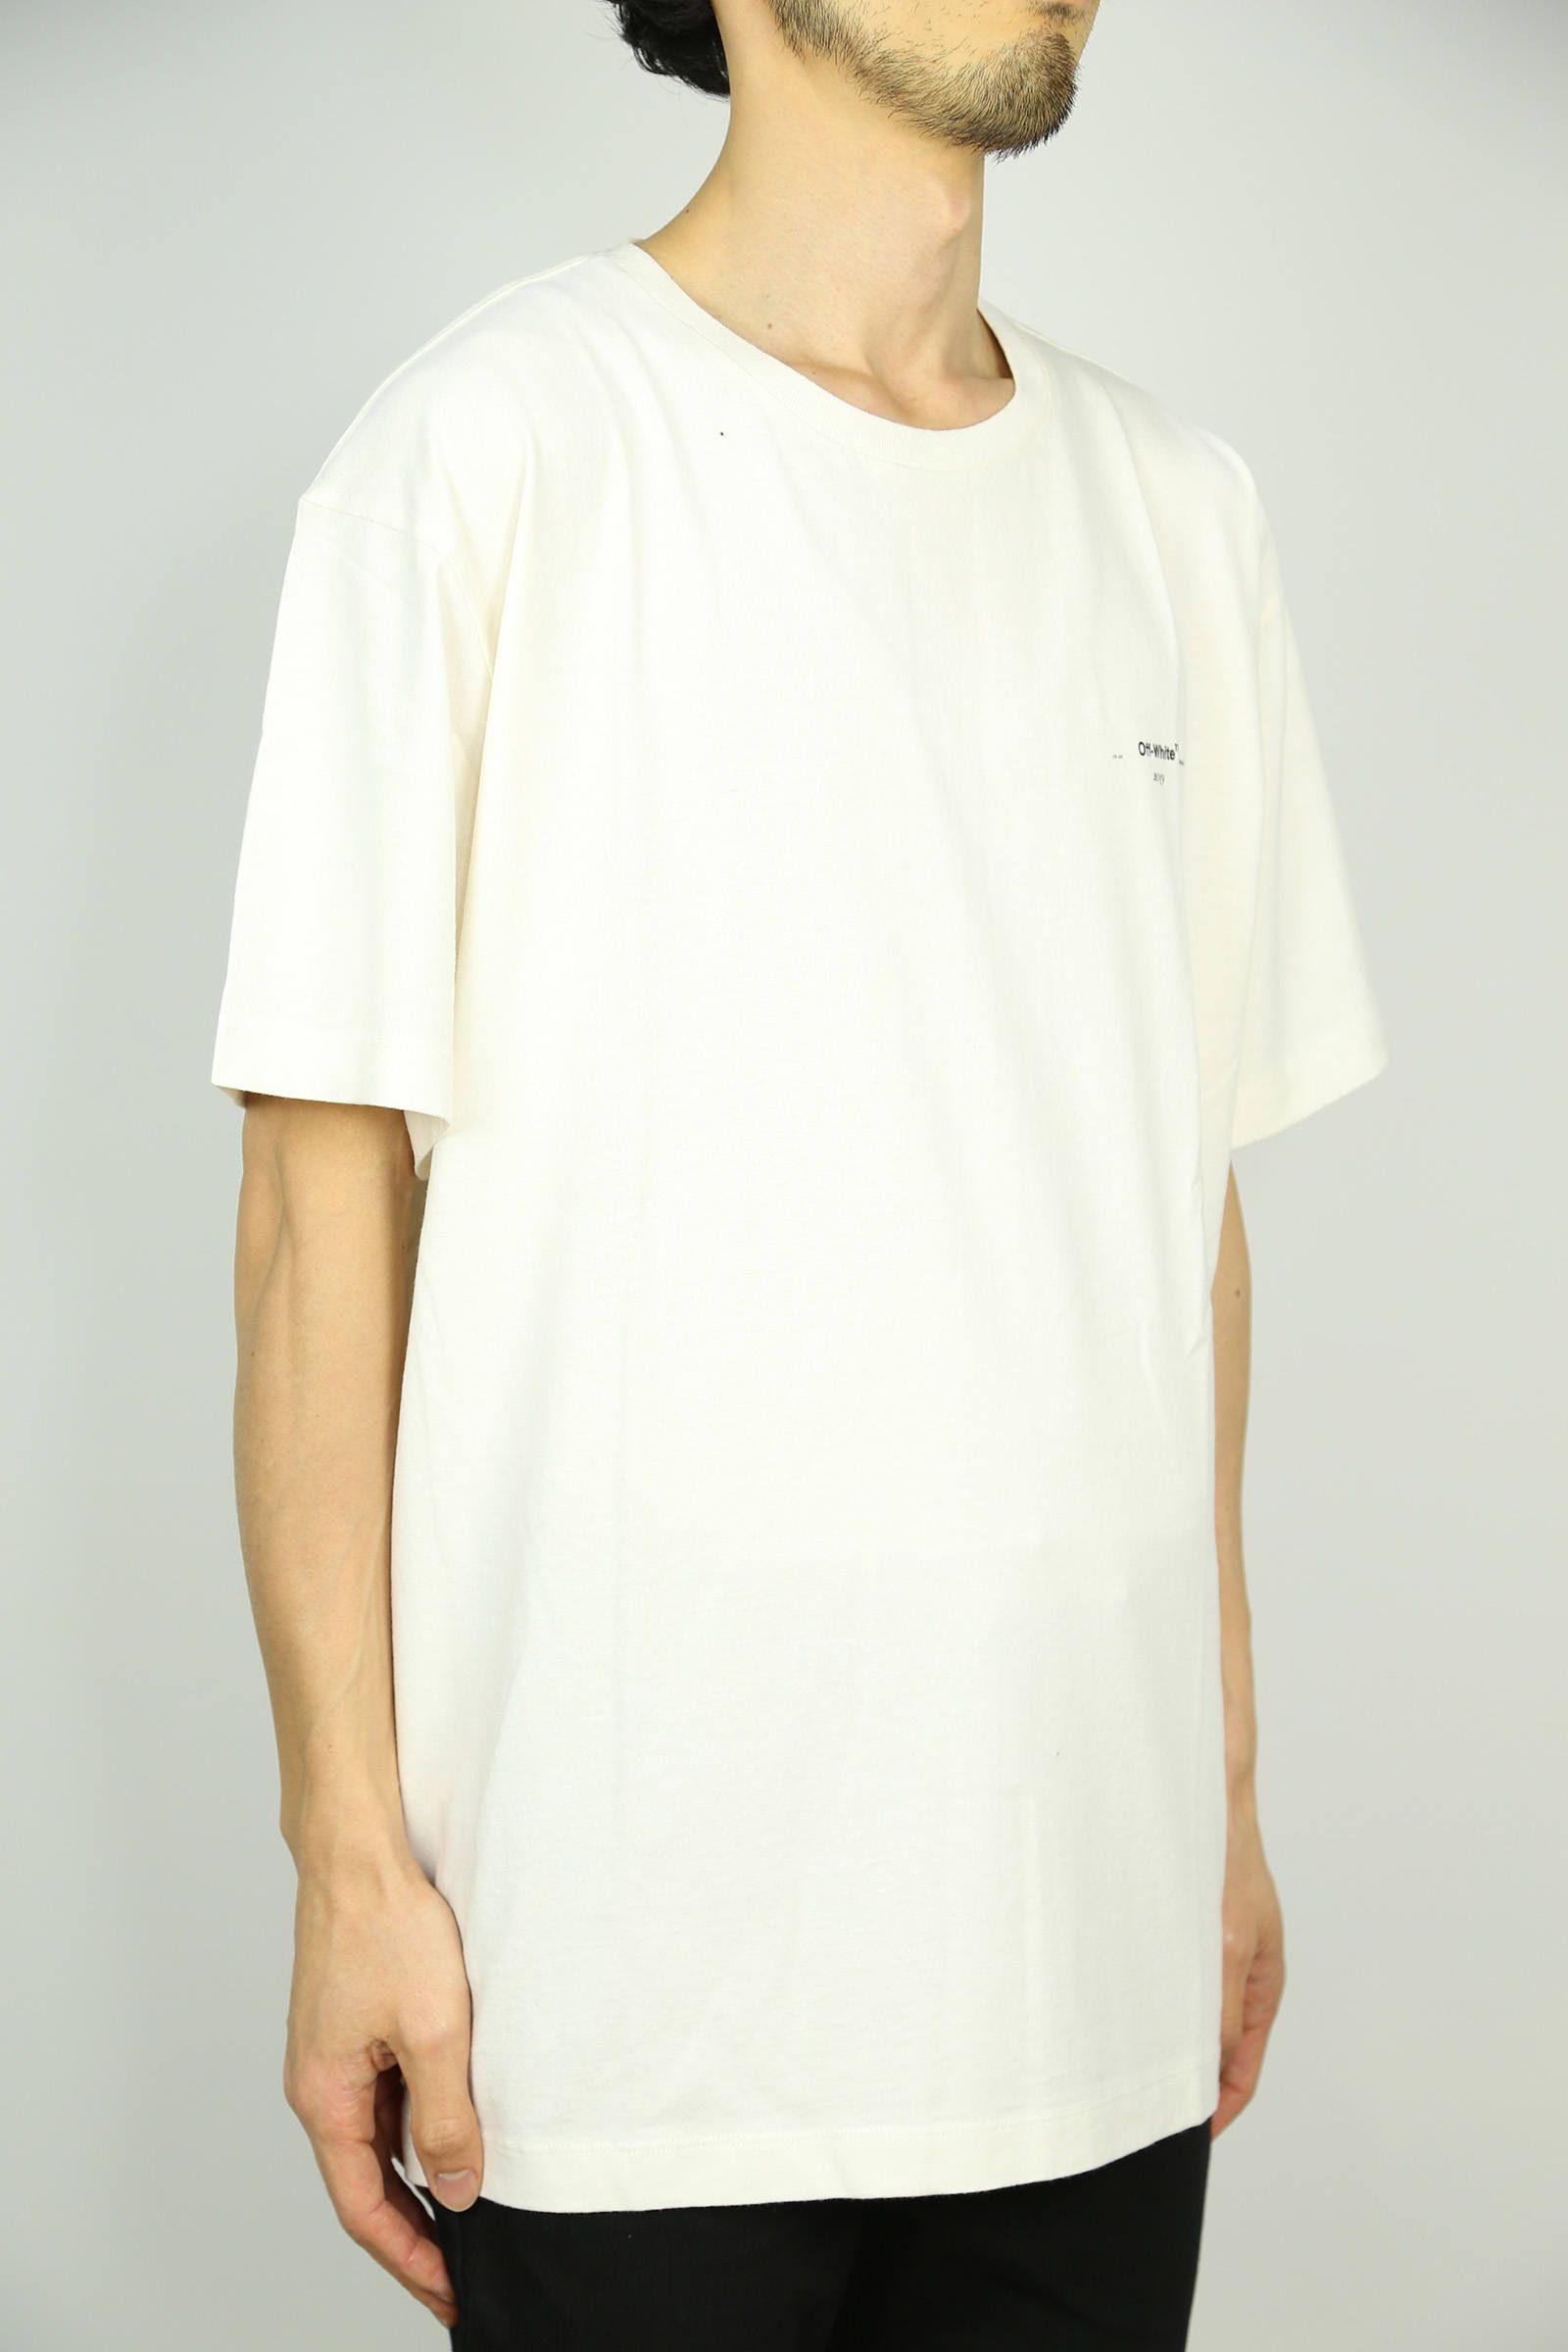 OFF-WHITE - COLORED ARROWS S/S OVER TEE / ブラック | Tempt